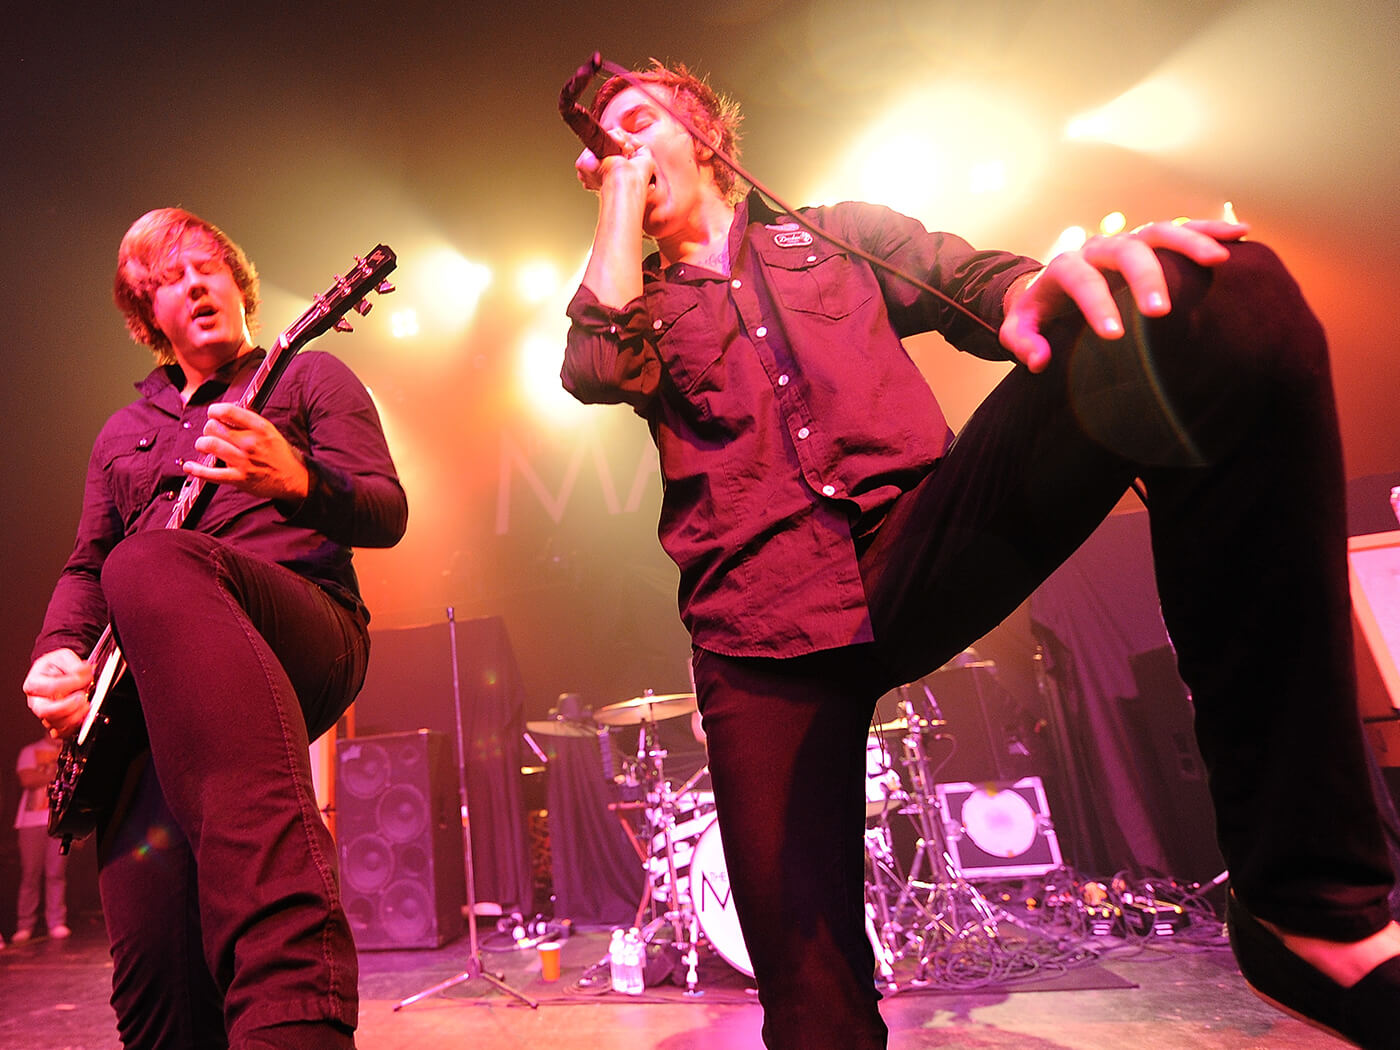 Jared Monaco and John O’Callaghan of The Maine performing in 2009, photo by C Flanigan/Film Magic via Getty Images